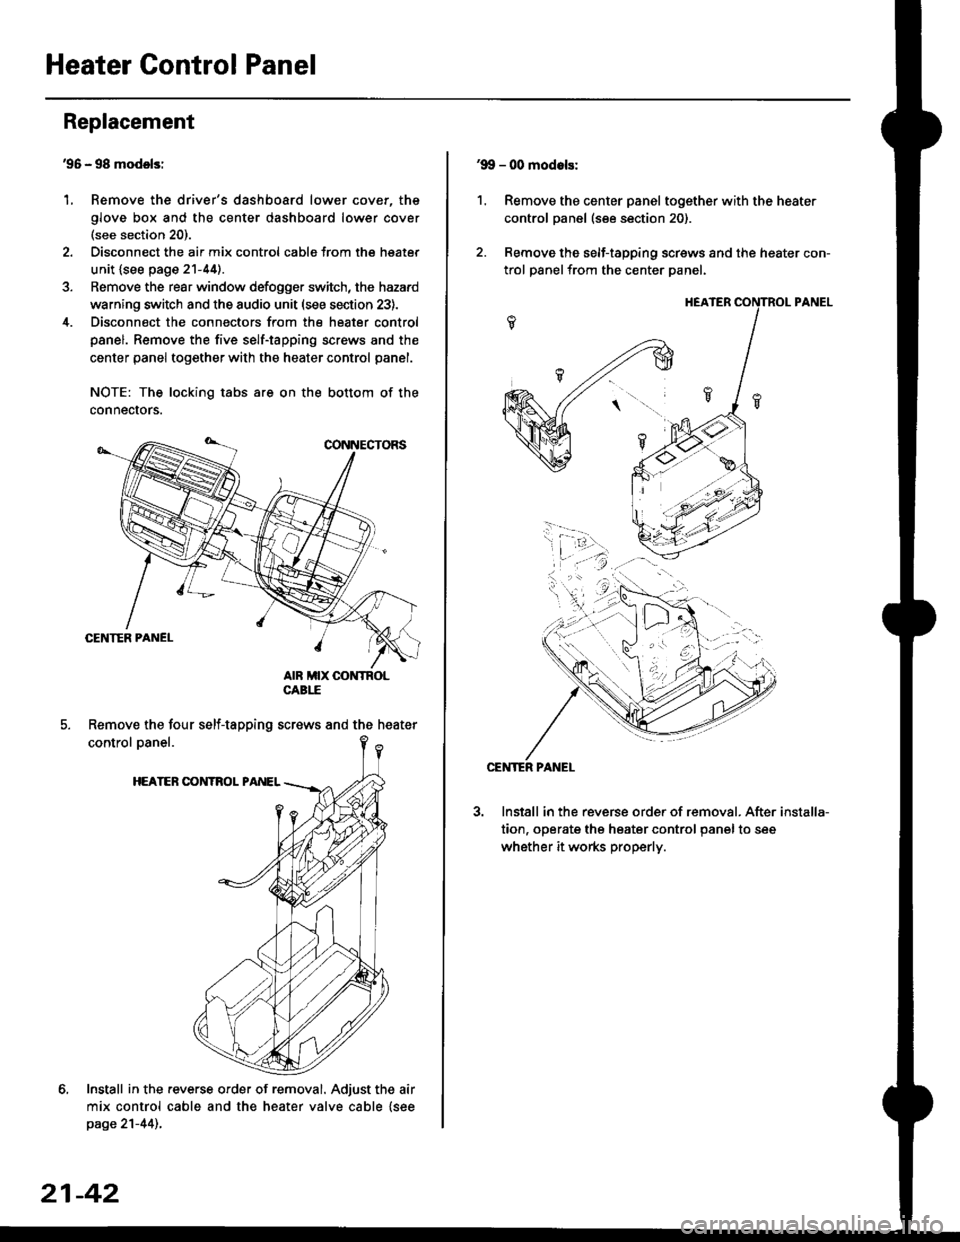 HONDA CIVIC 1999 6.G Workshop Manual Heater Control Panel
95 - 98 modolsi
Remove the drivers dashboard lower cover, the
glove box and the center dashboard lower cover(see section 20).
Disconnect the air mix control cabls from the heate